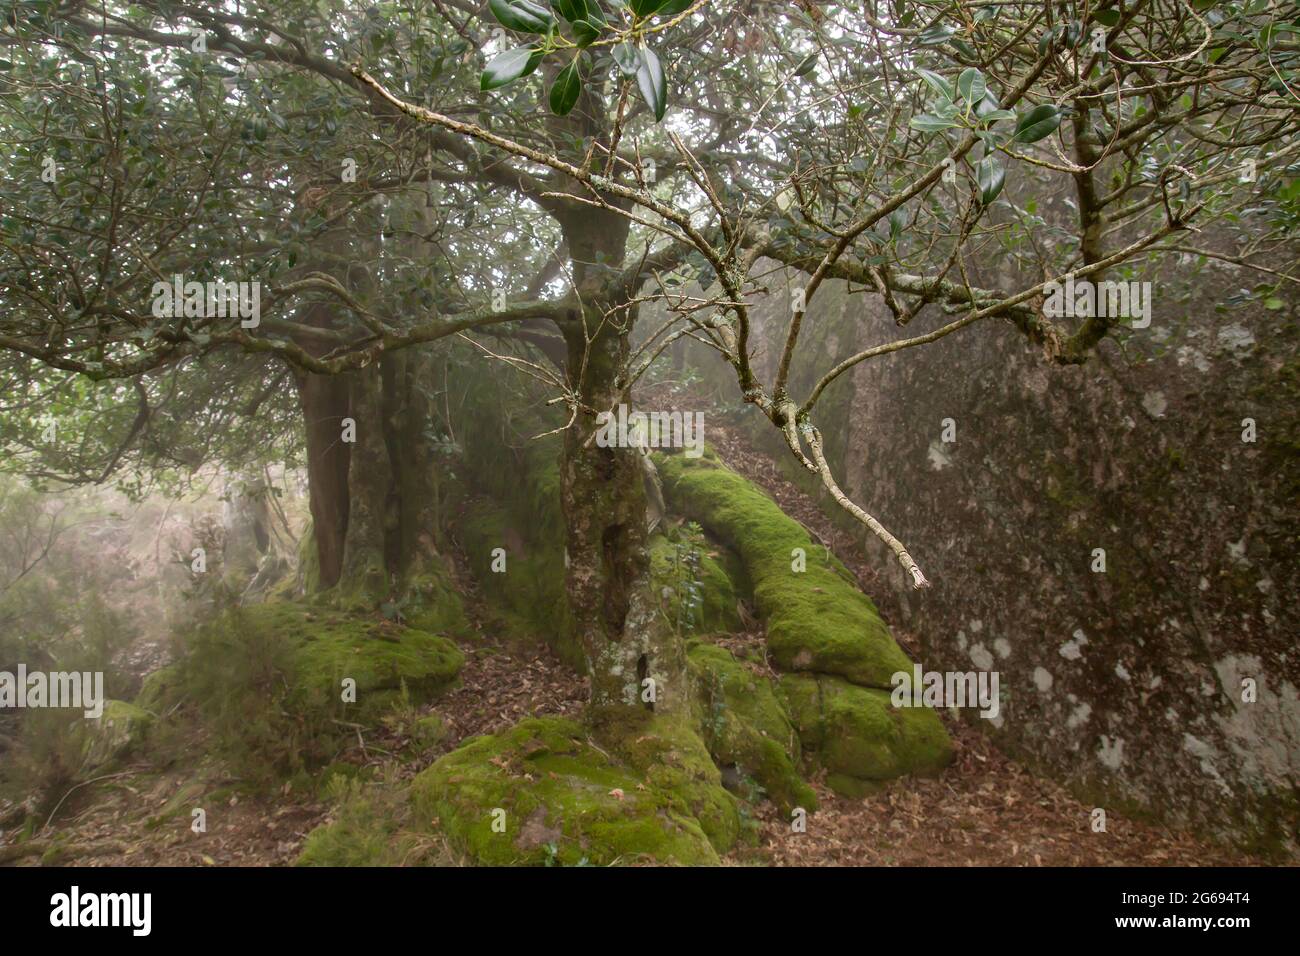 Holly trees in enchanted forest Stock Photo